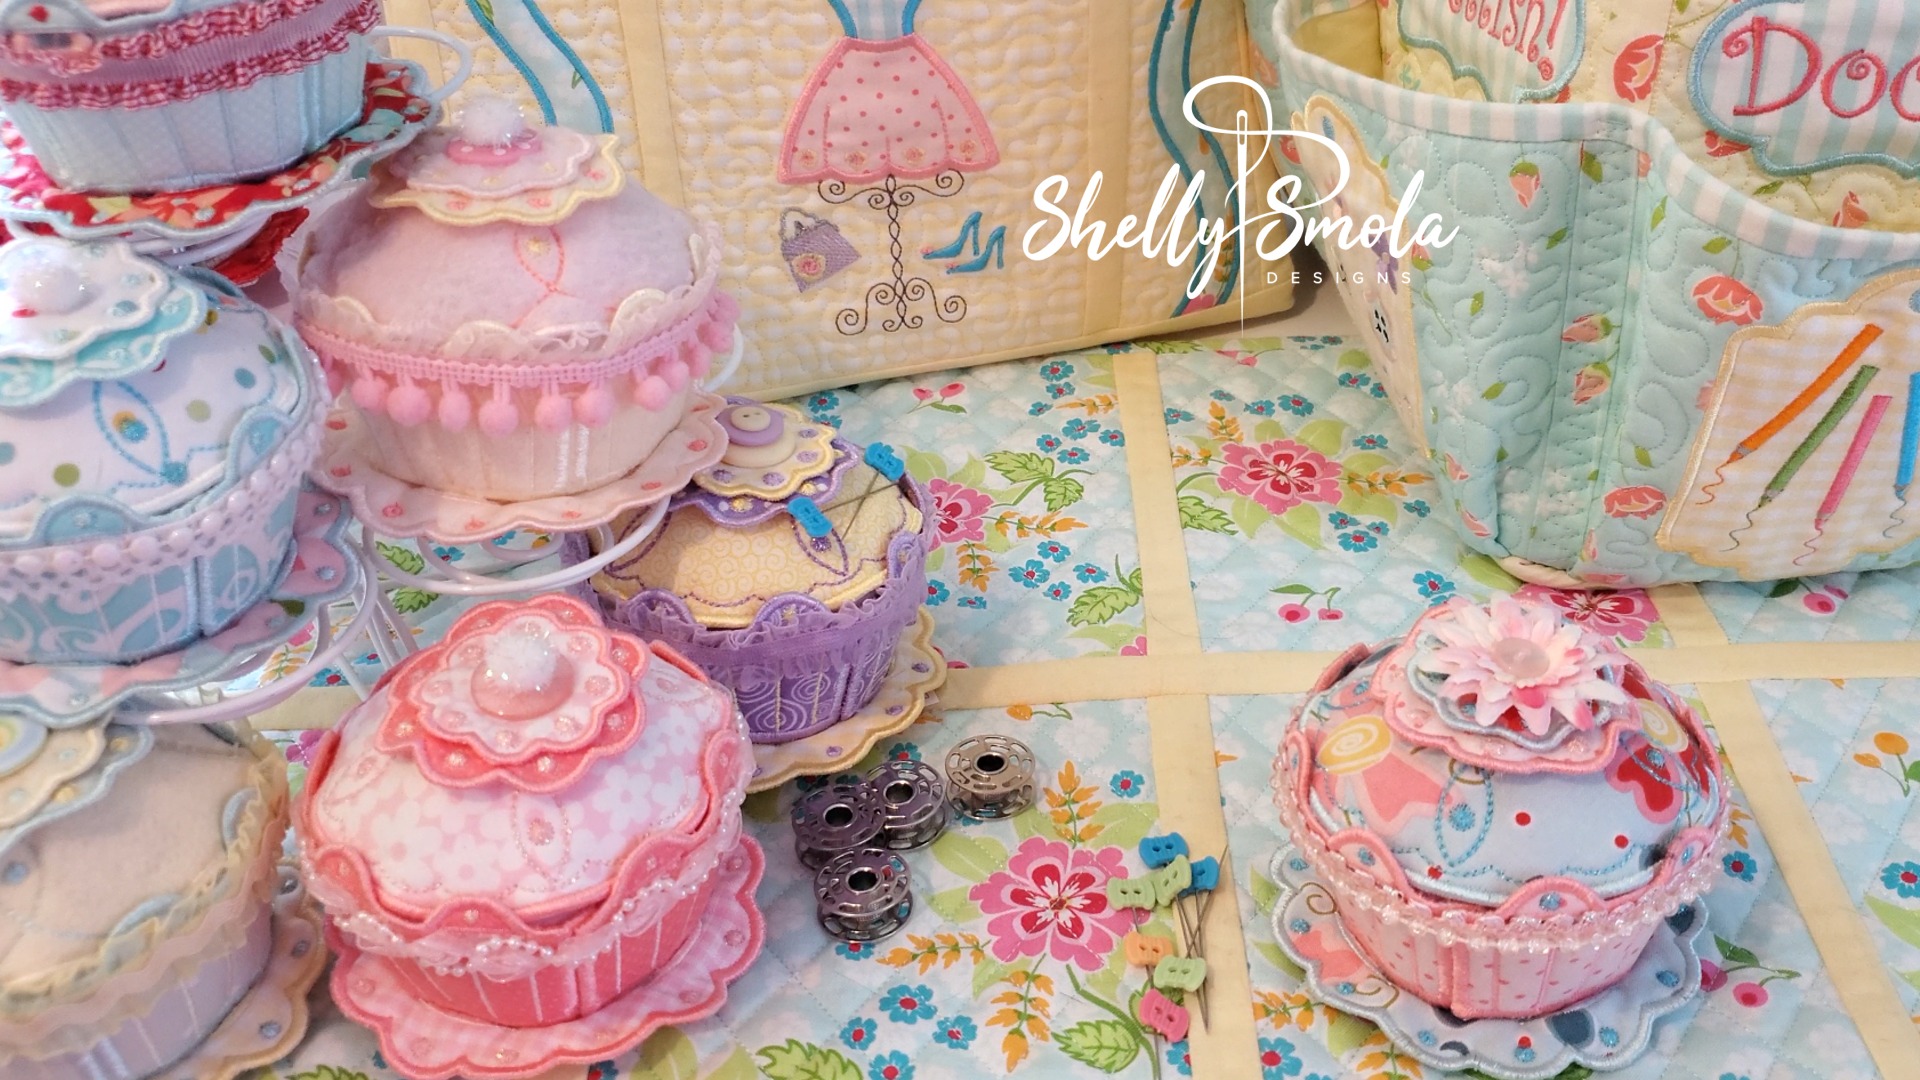 Sew Sweet by Shelly Smola